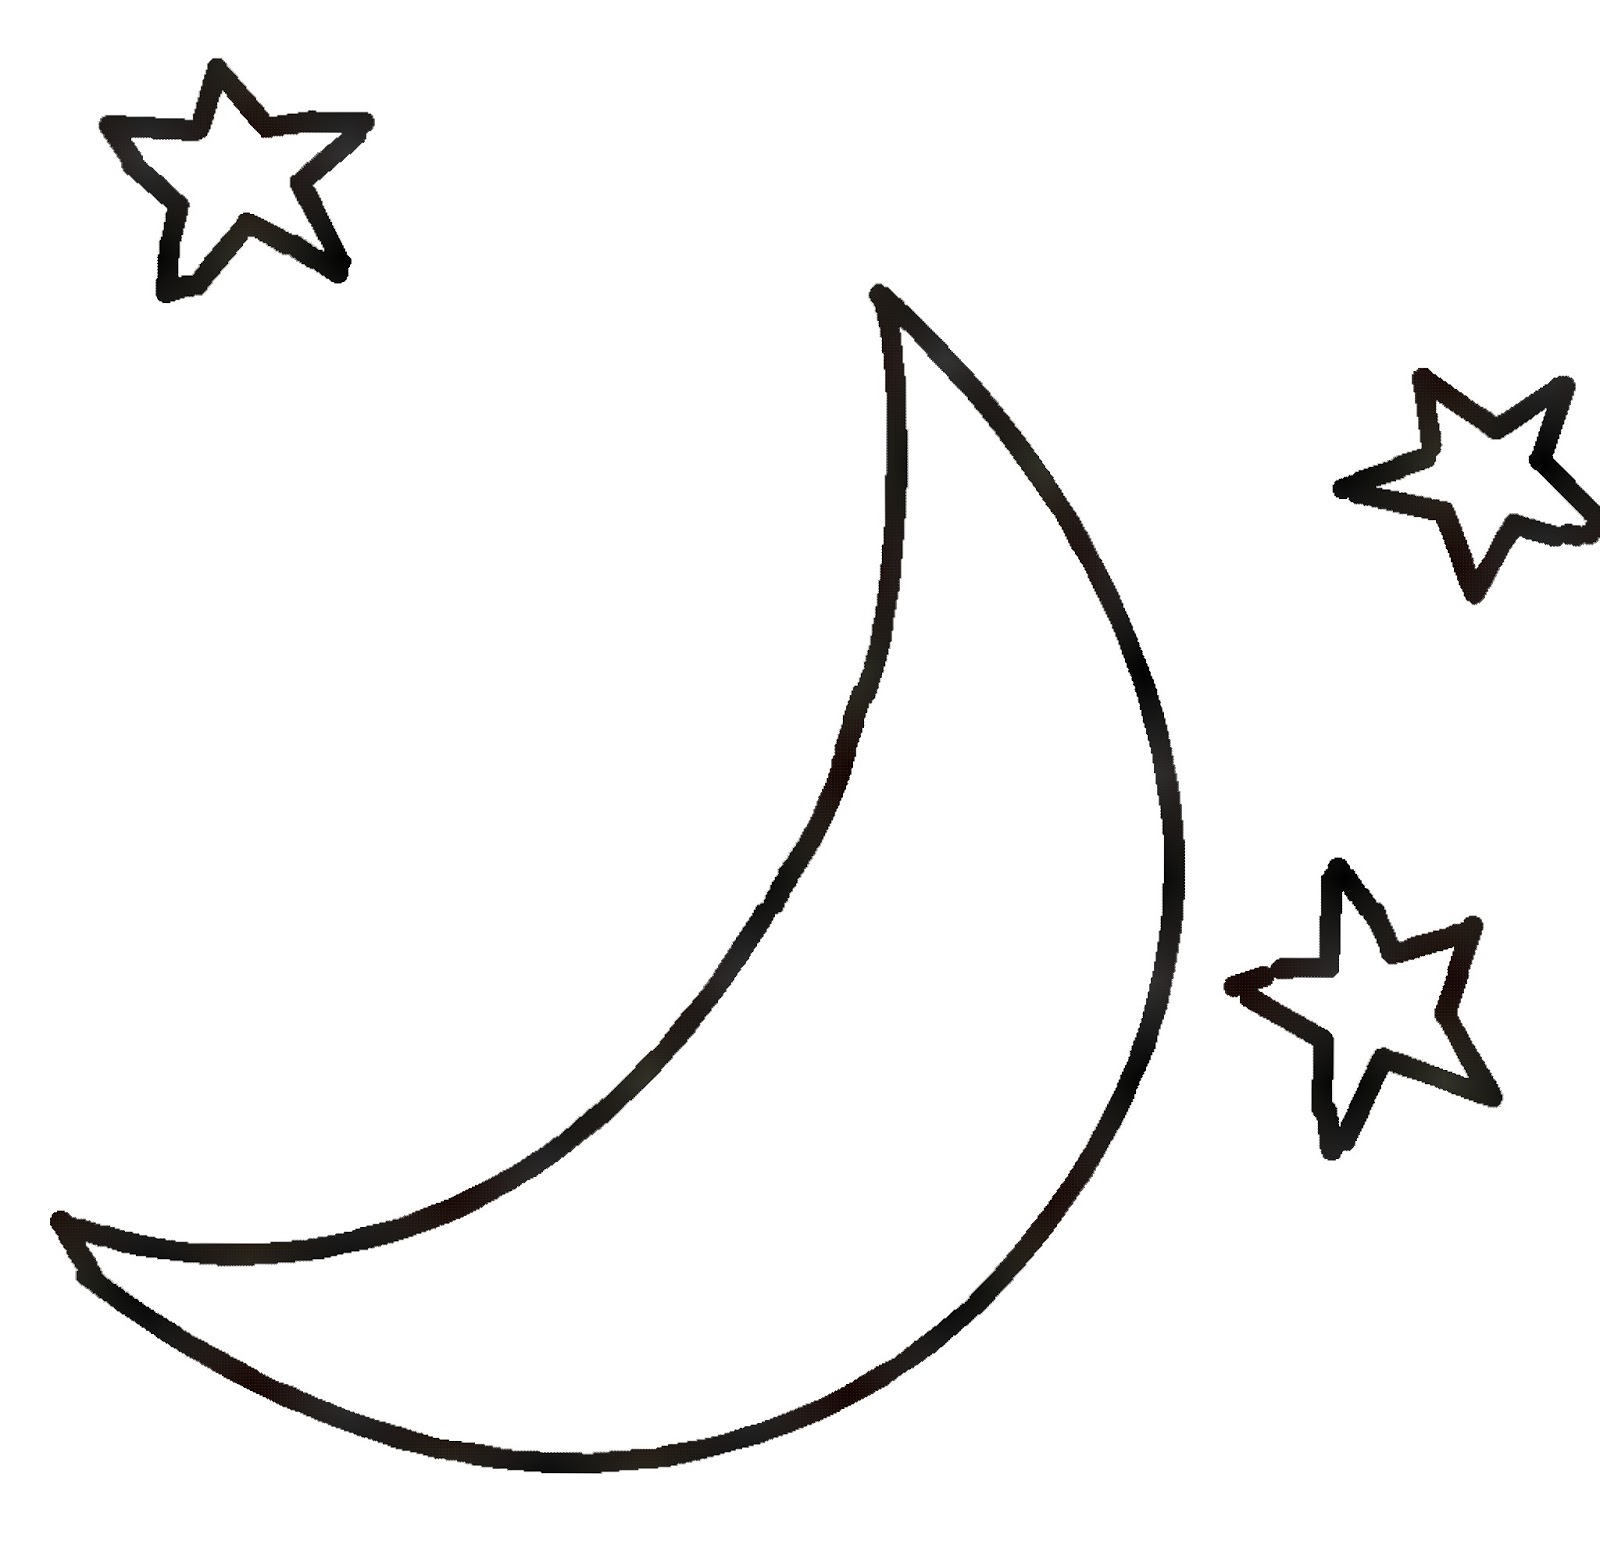 Free Moon Clipart Black And White, Download Free Clip Art.